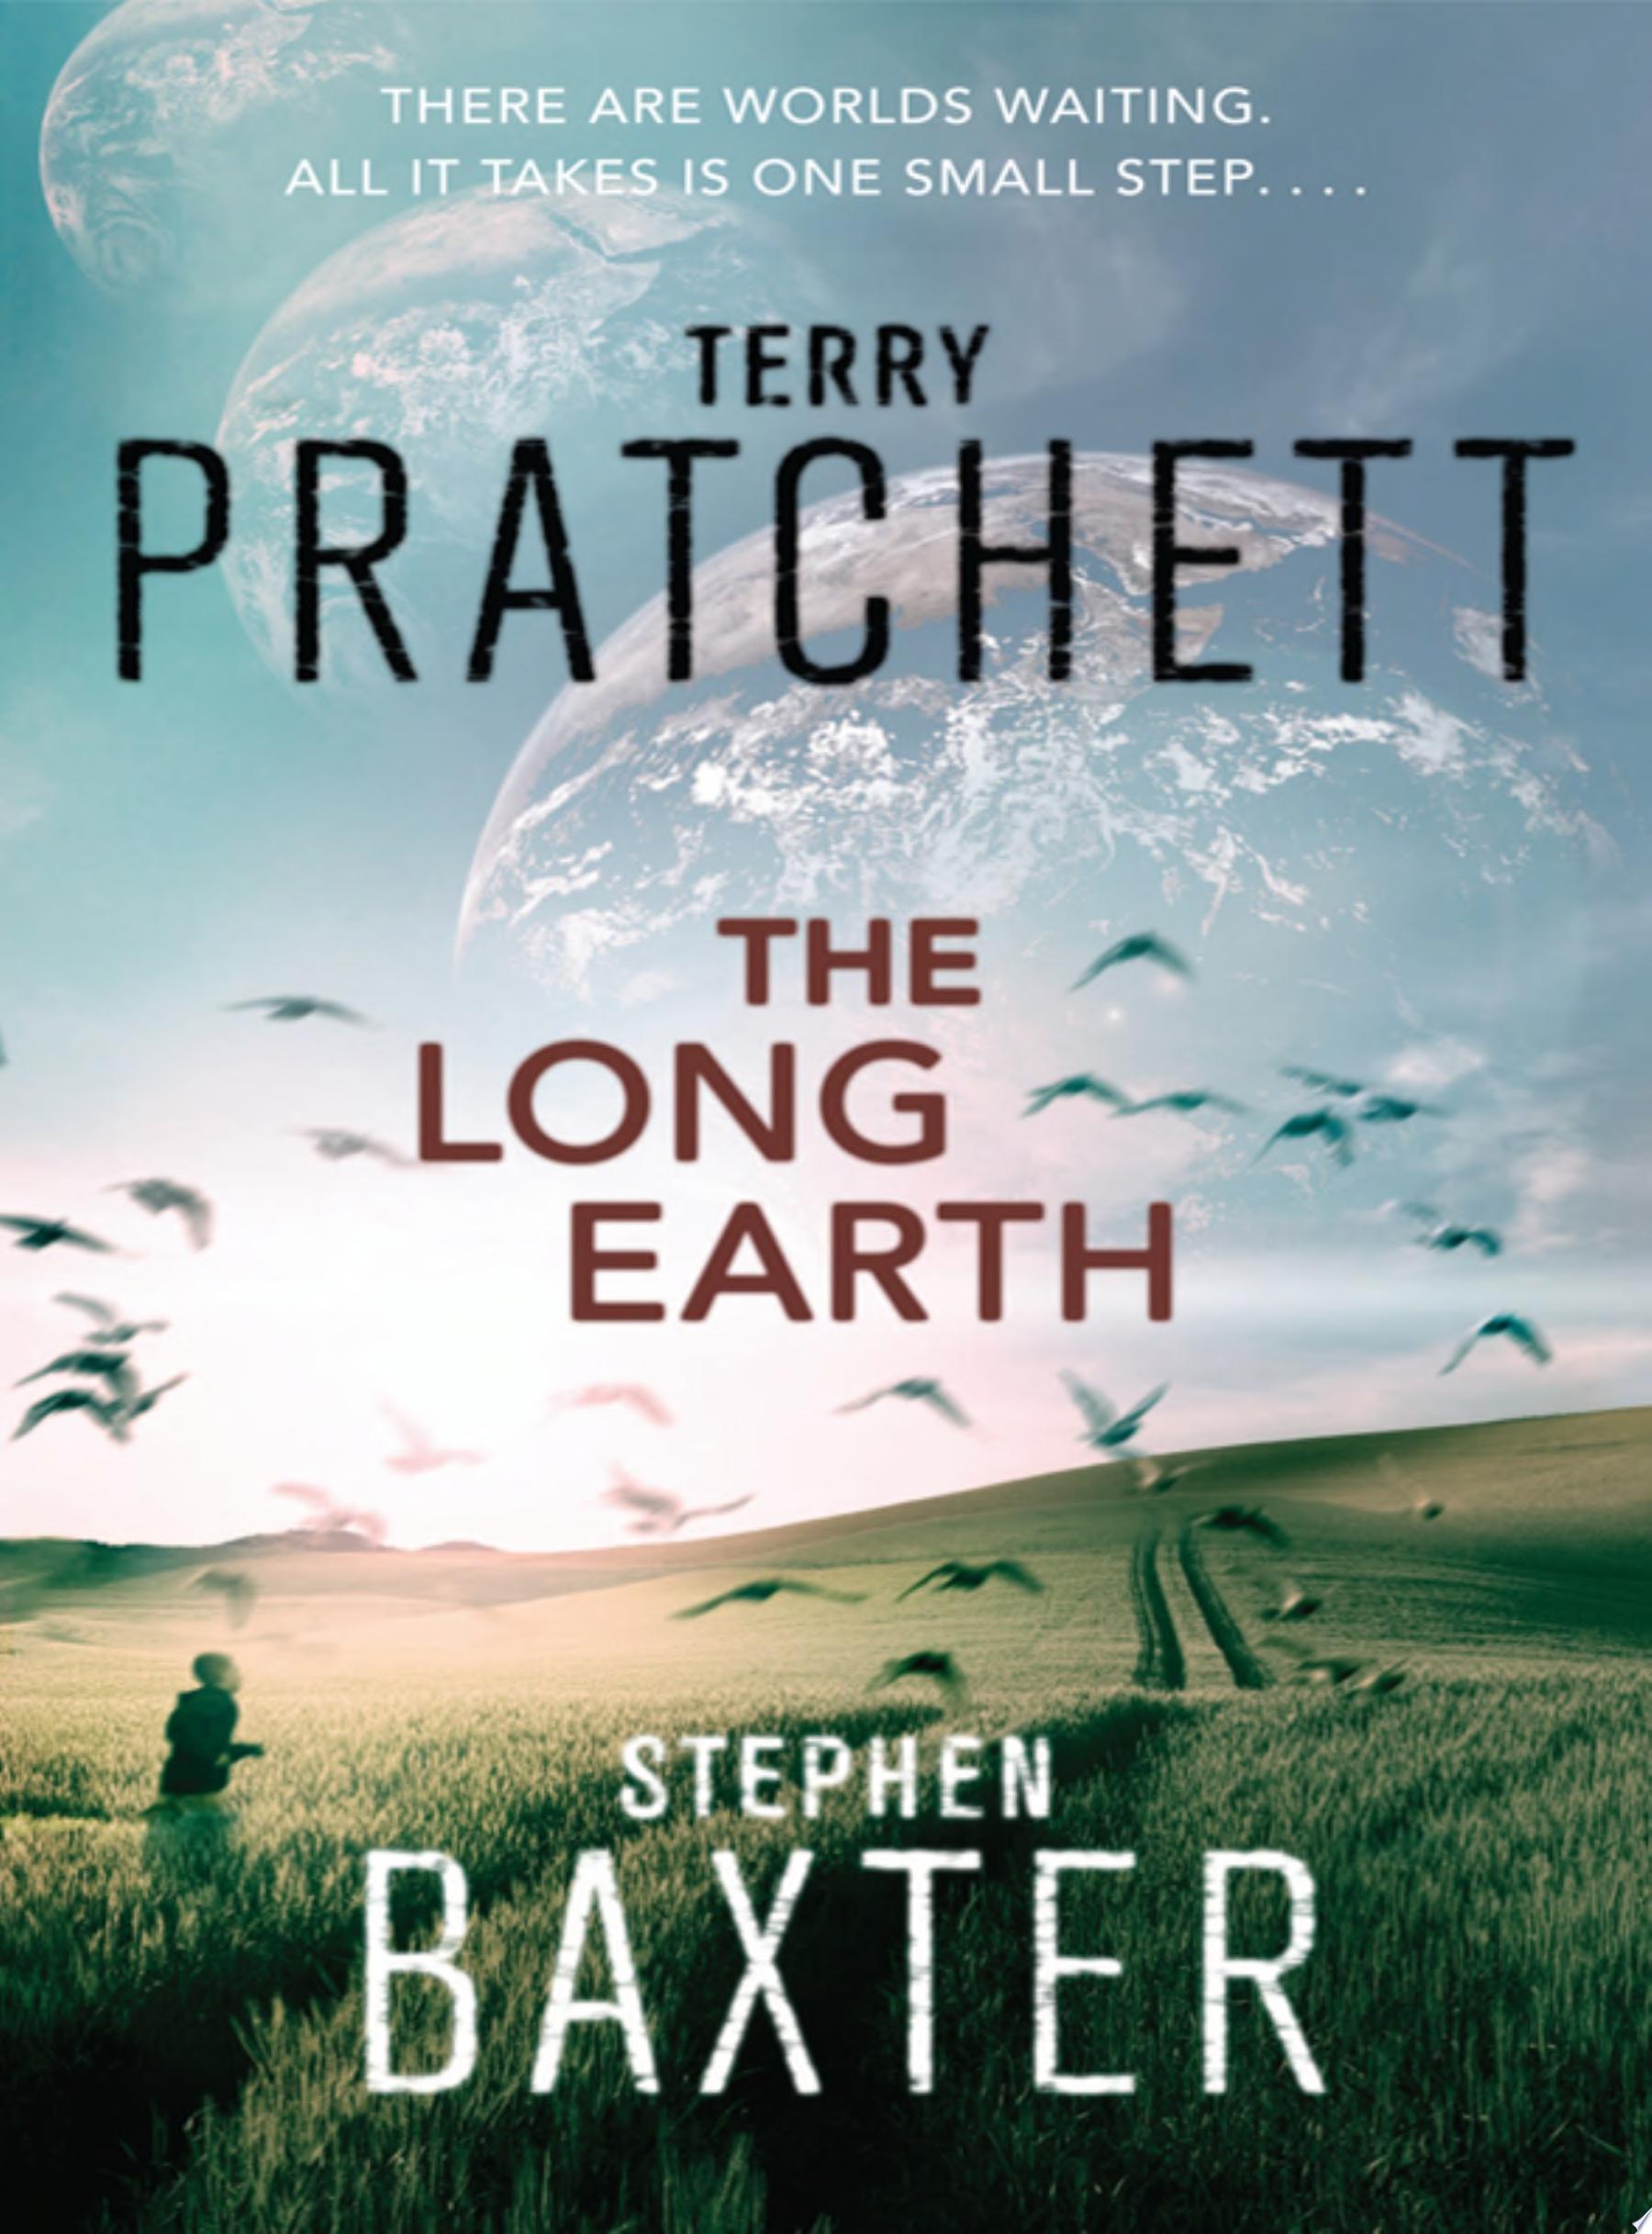 Image for "The Long Earth"